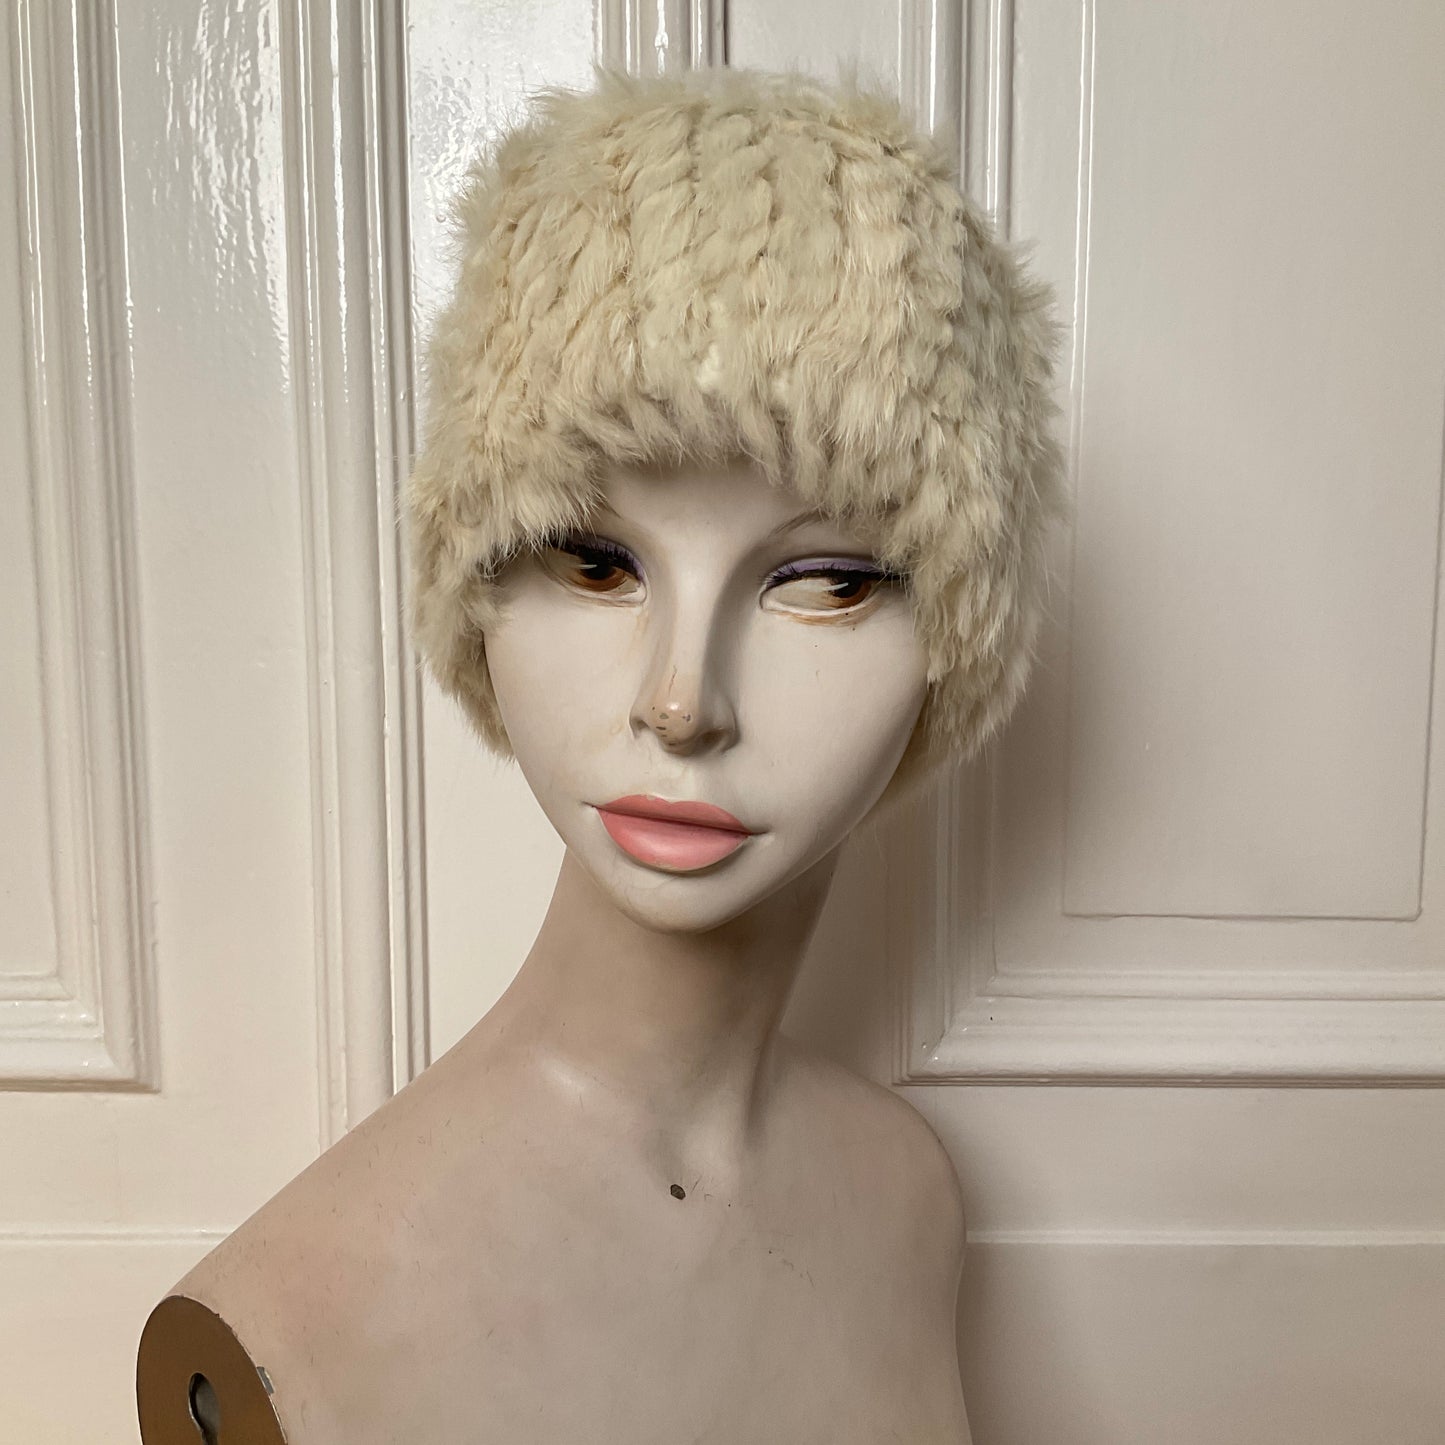 Cute knit wool hat with fur